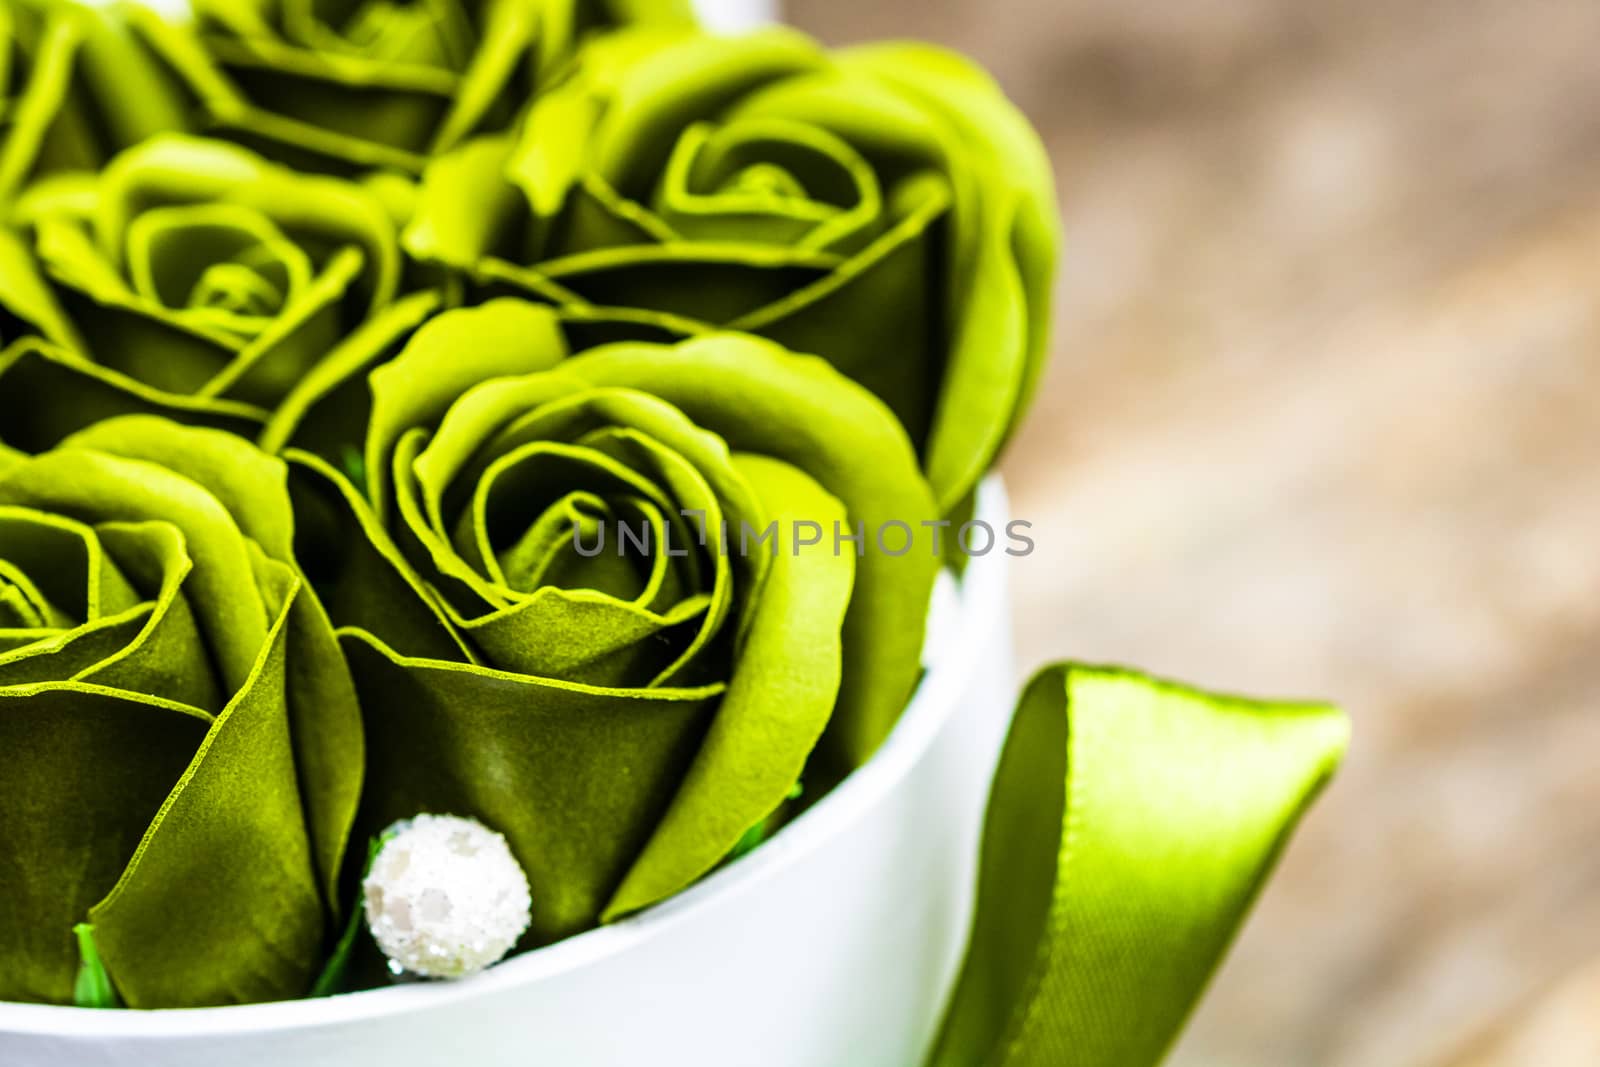 Green roses in a round luxury present box. Bouquet of flowers in by vladispas